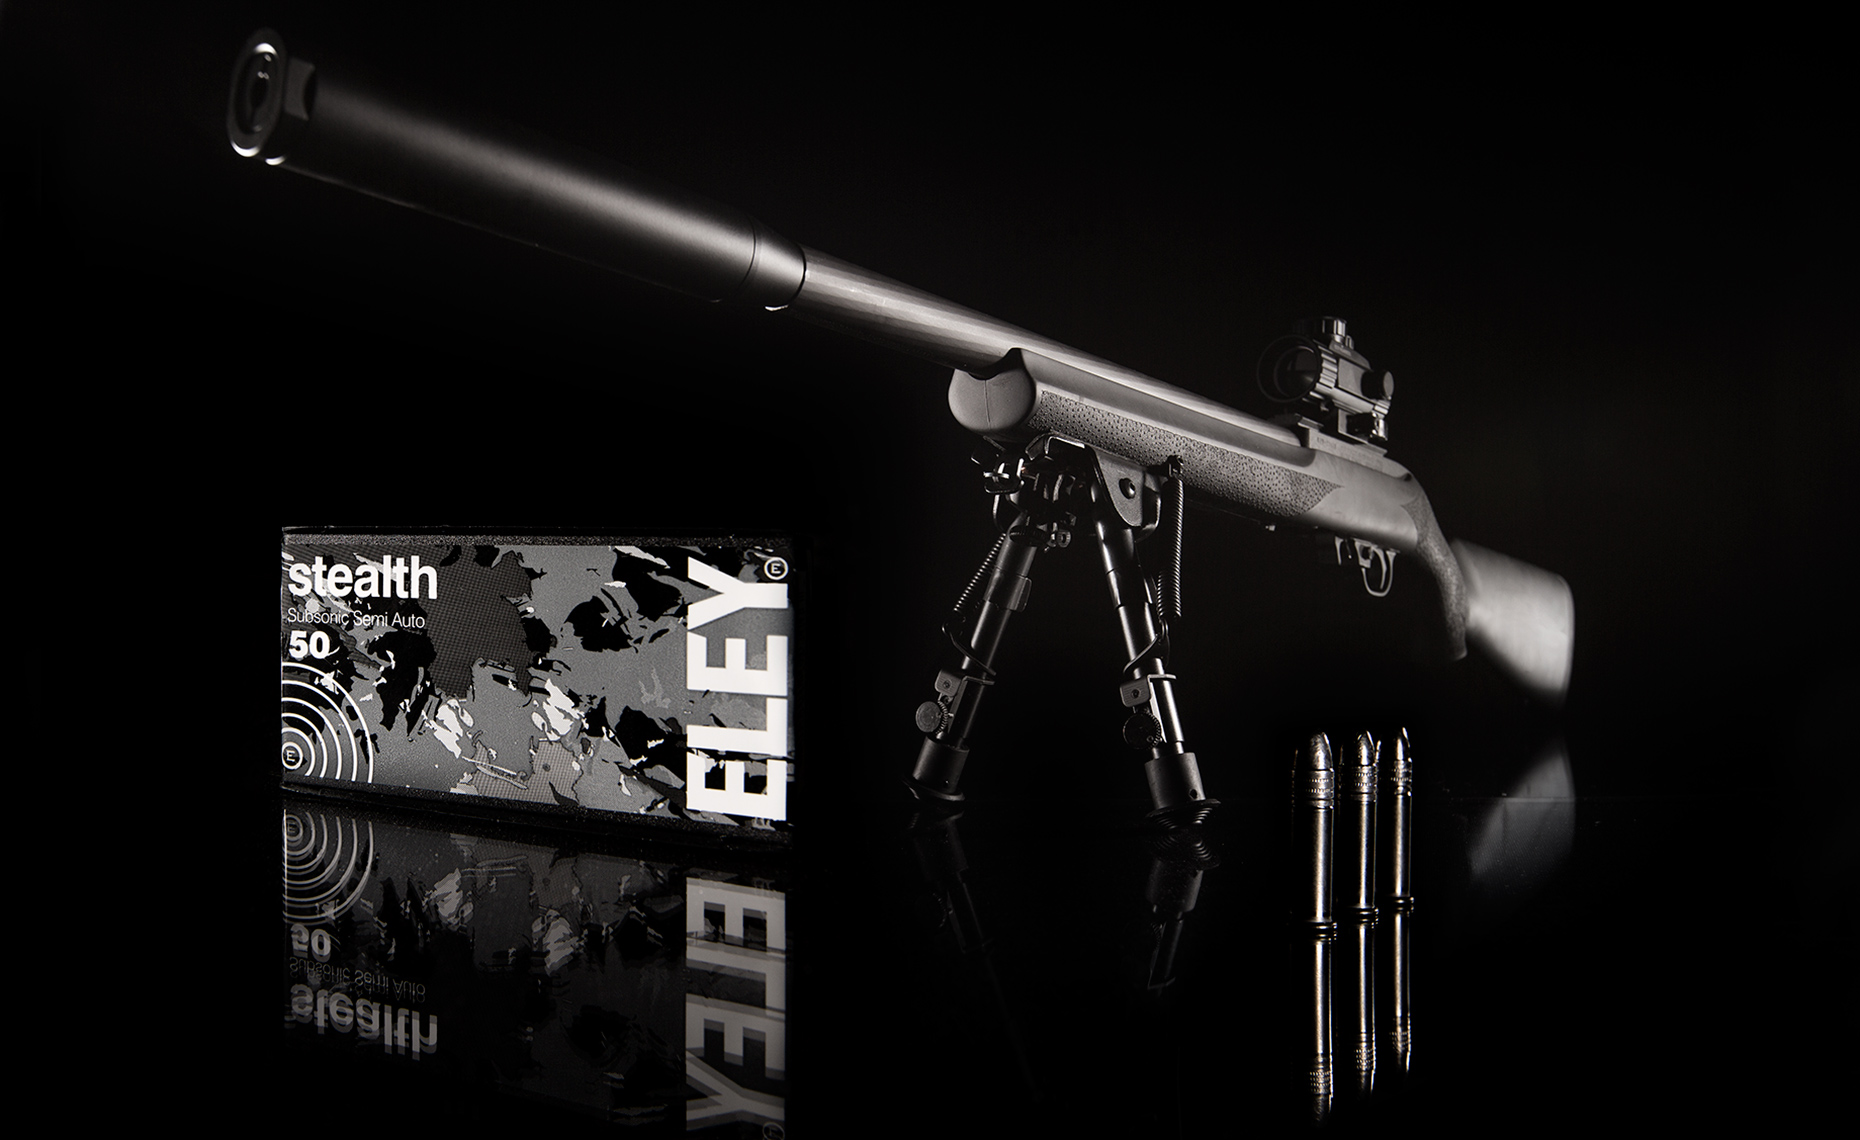 Advertising photography of .22 rifle and ammunition shot in a Warwickshire studio on a black background.